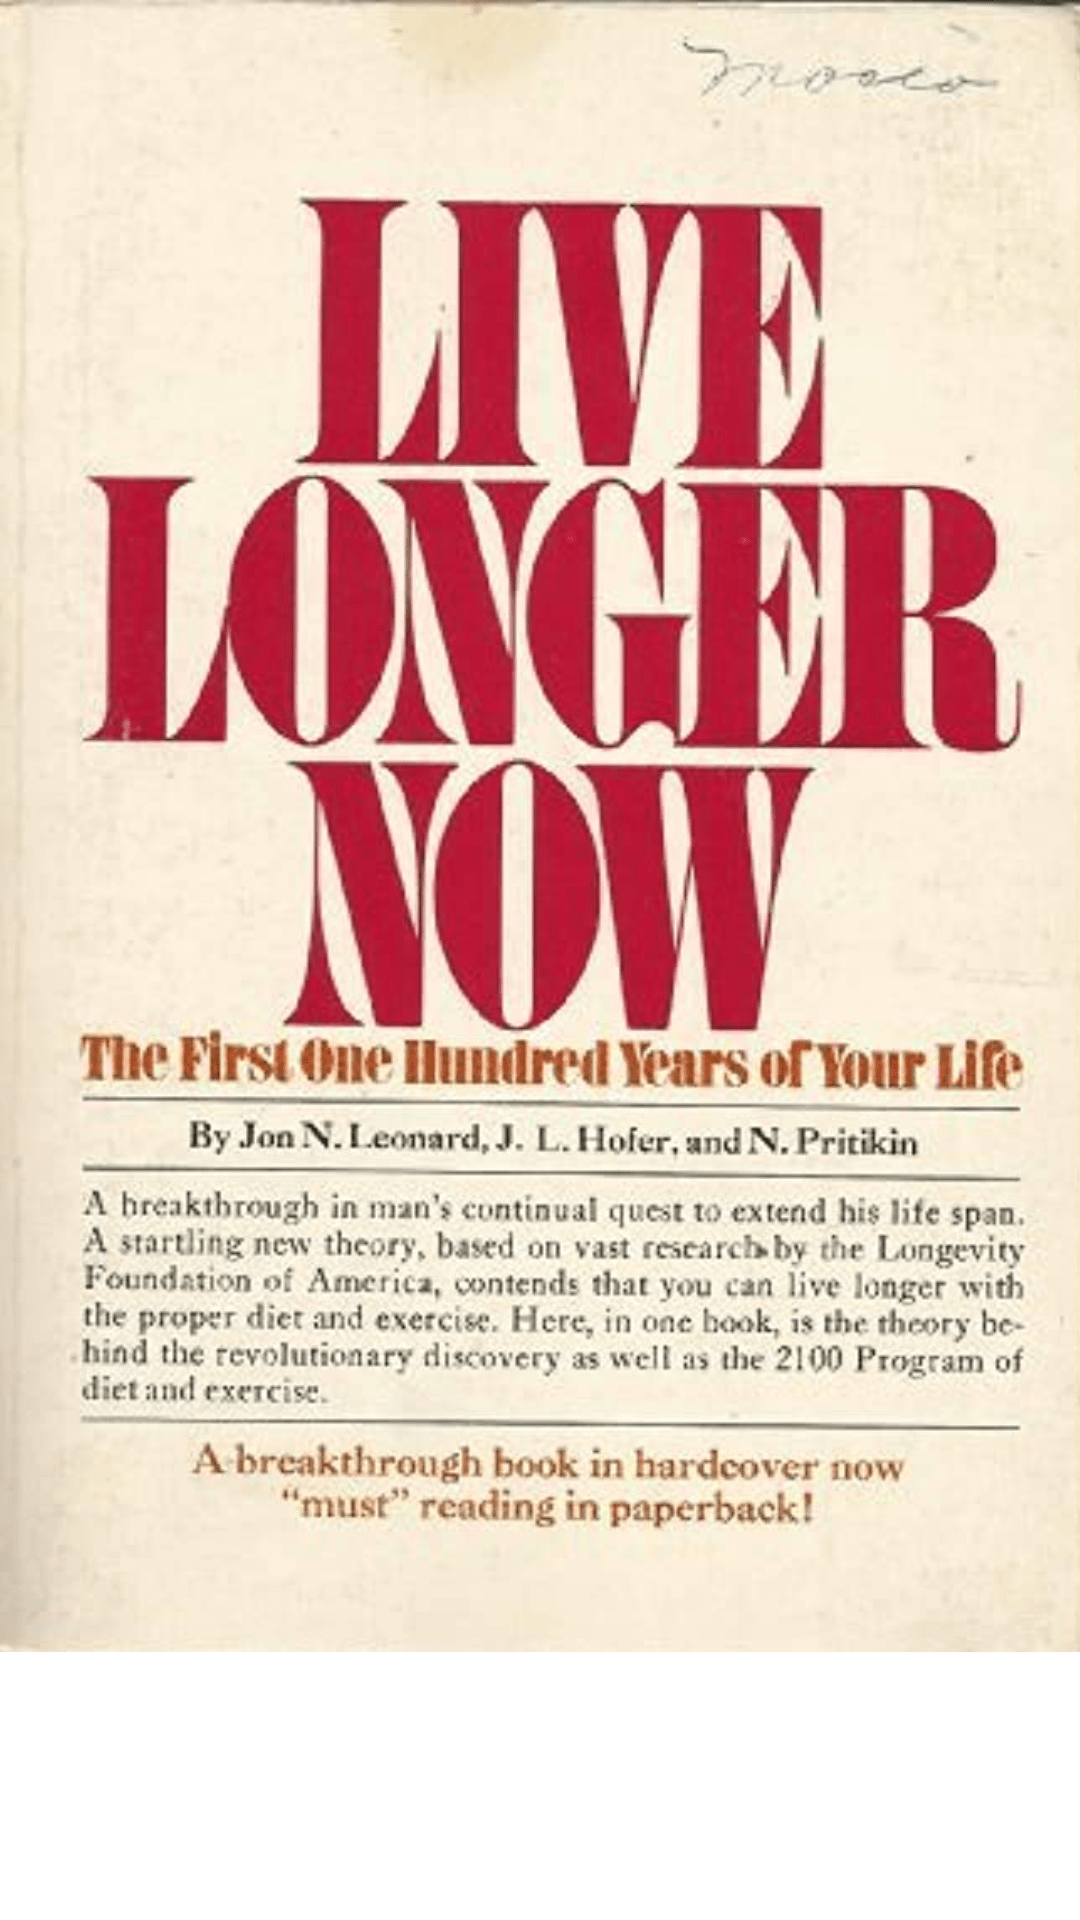 Live Longer Now: The First One Hundred Years of Your Life